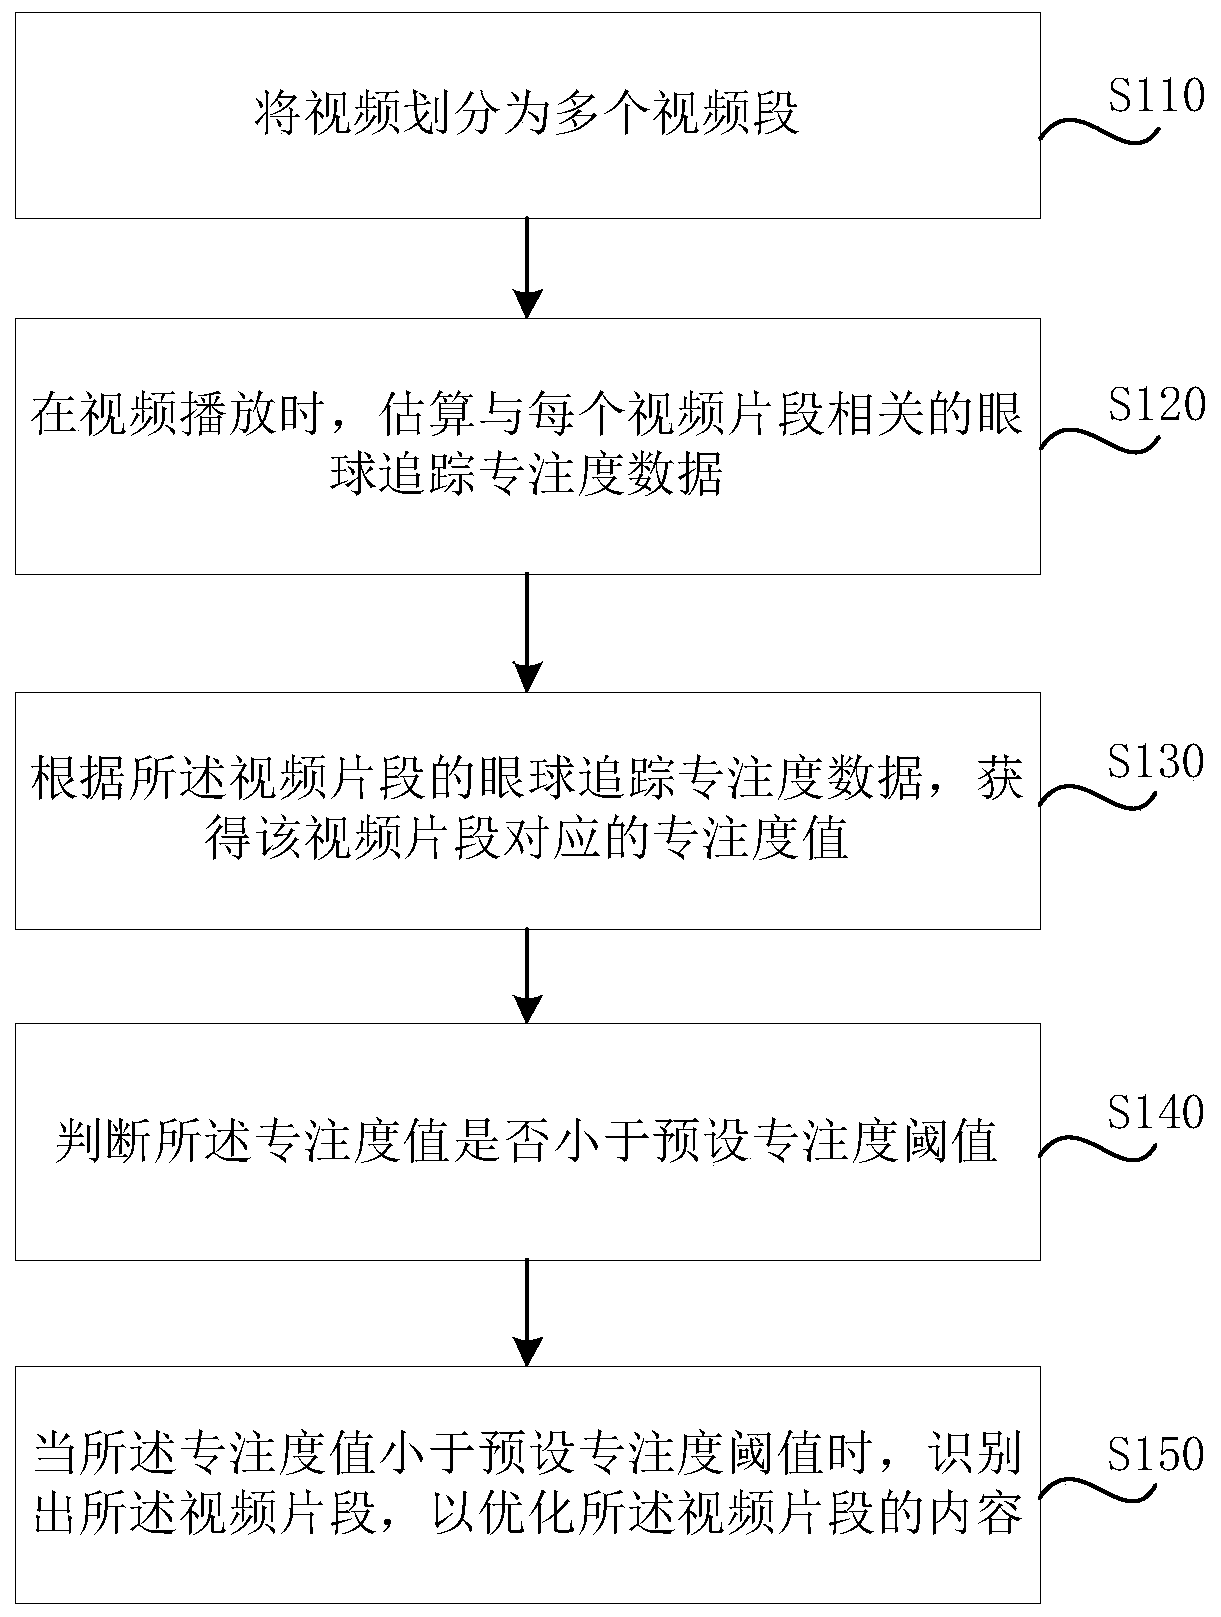 Video content identification method and device, storage medium and electronic equipment